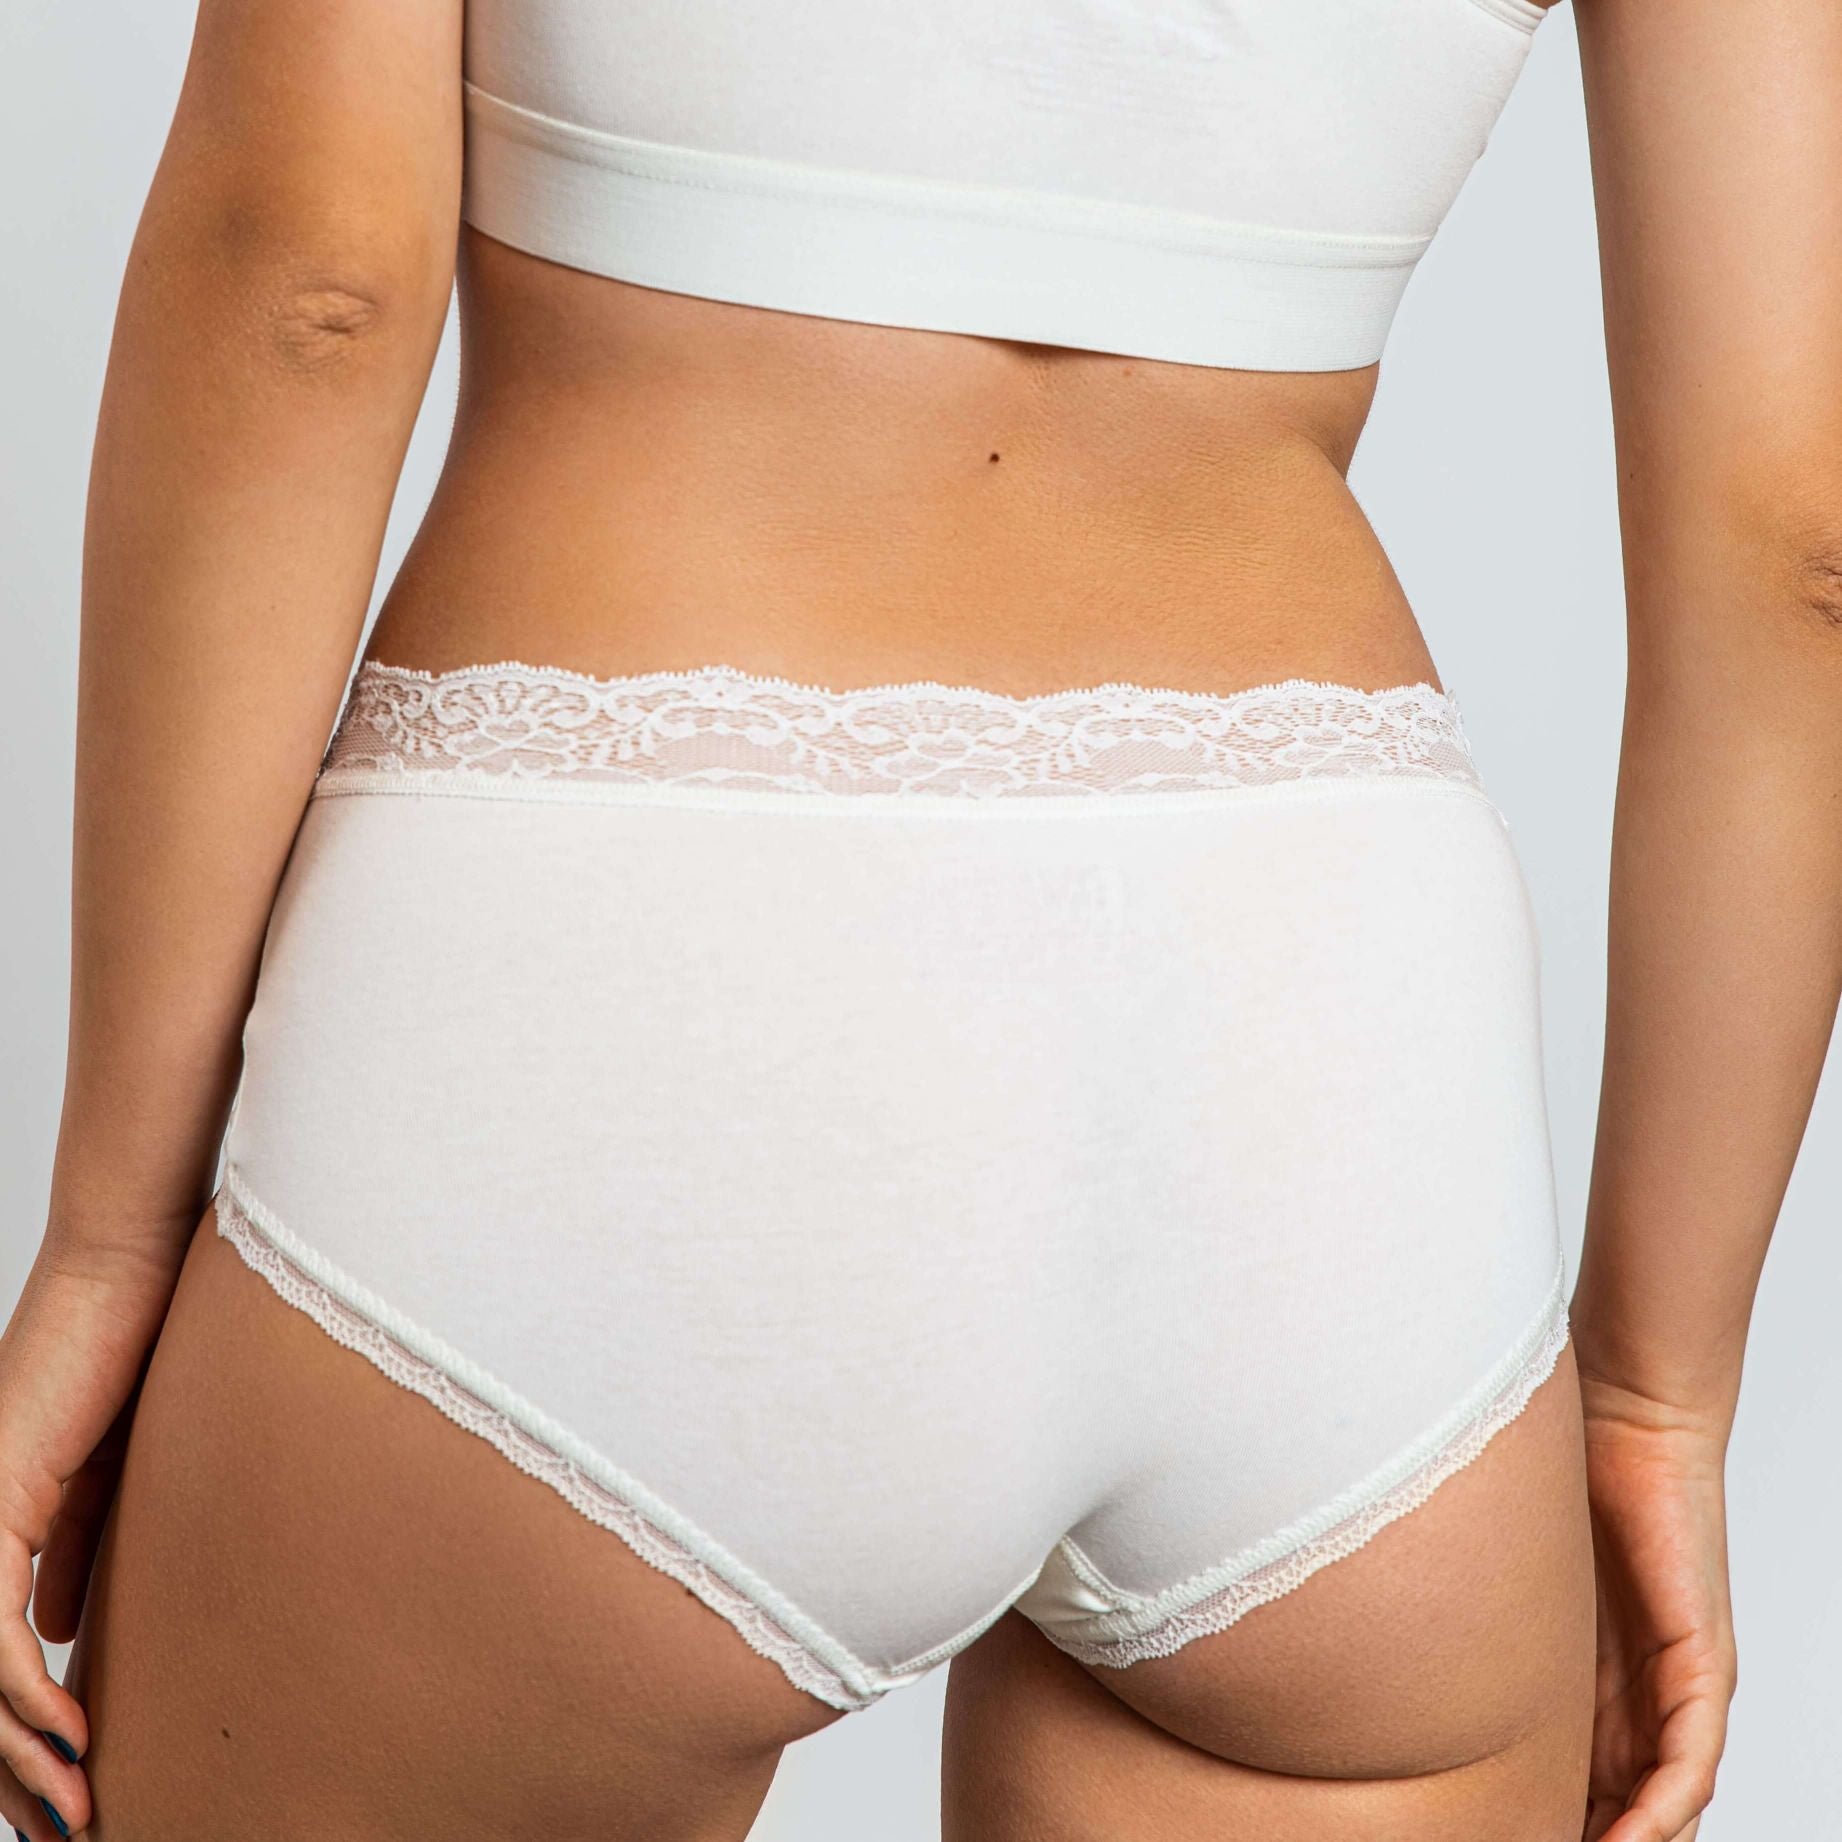 Women's Organic Cotton Hipster Briefs in Optic White